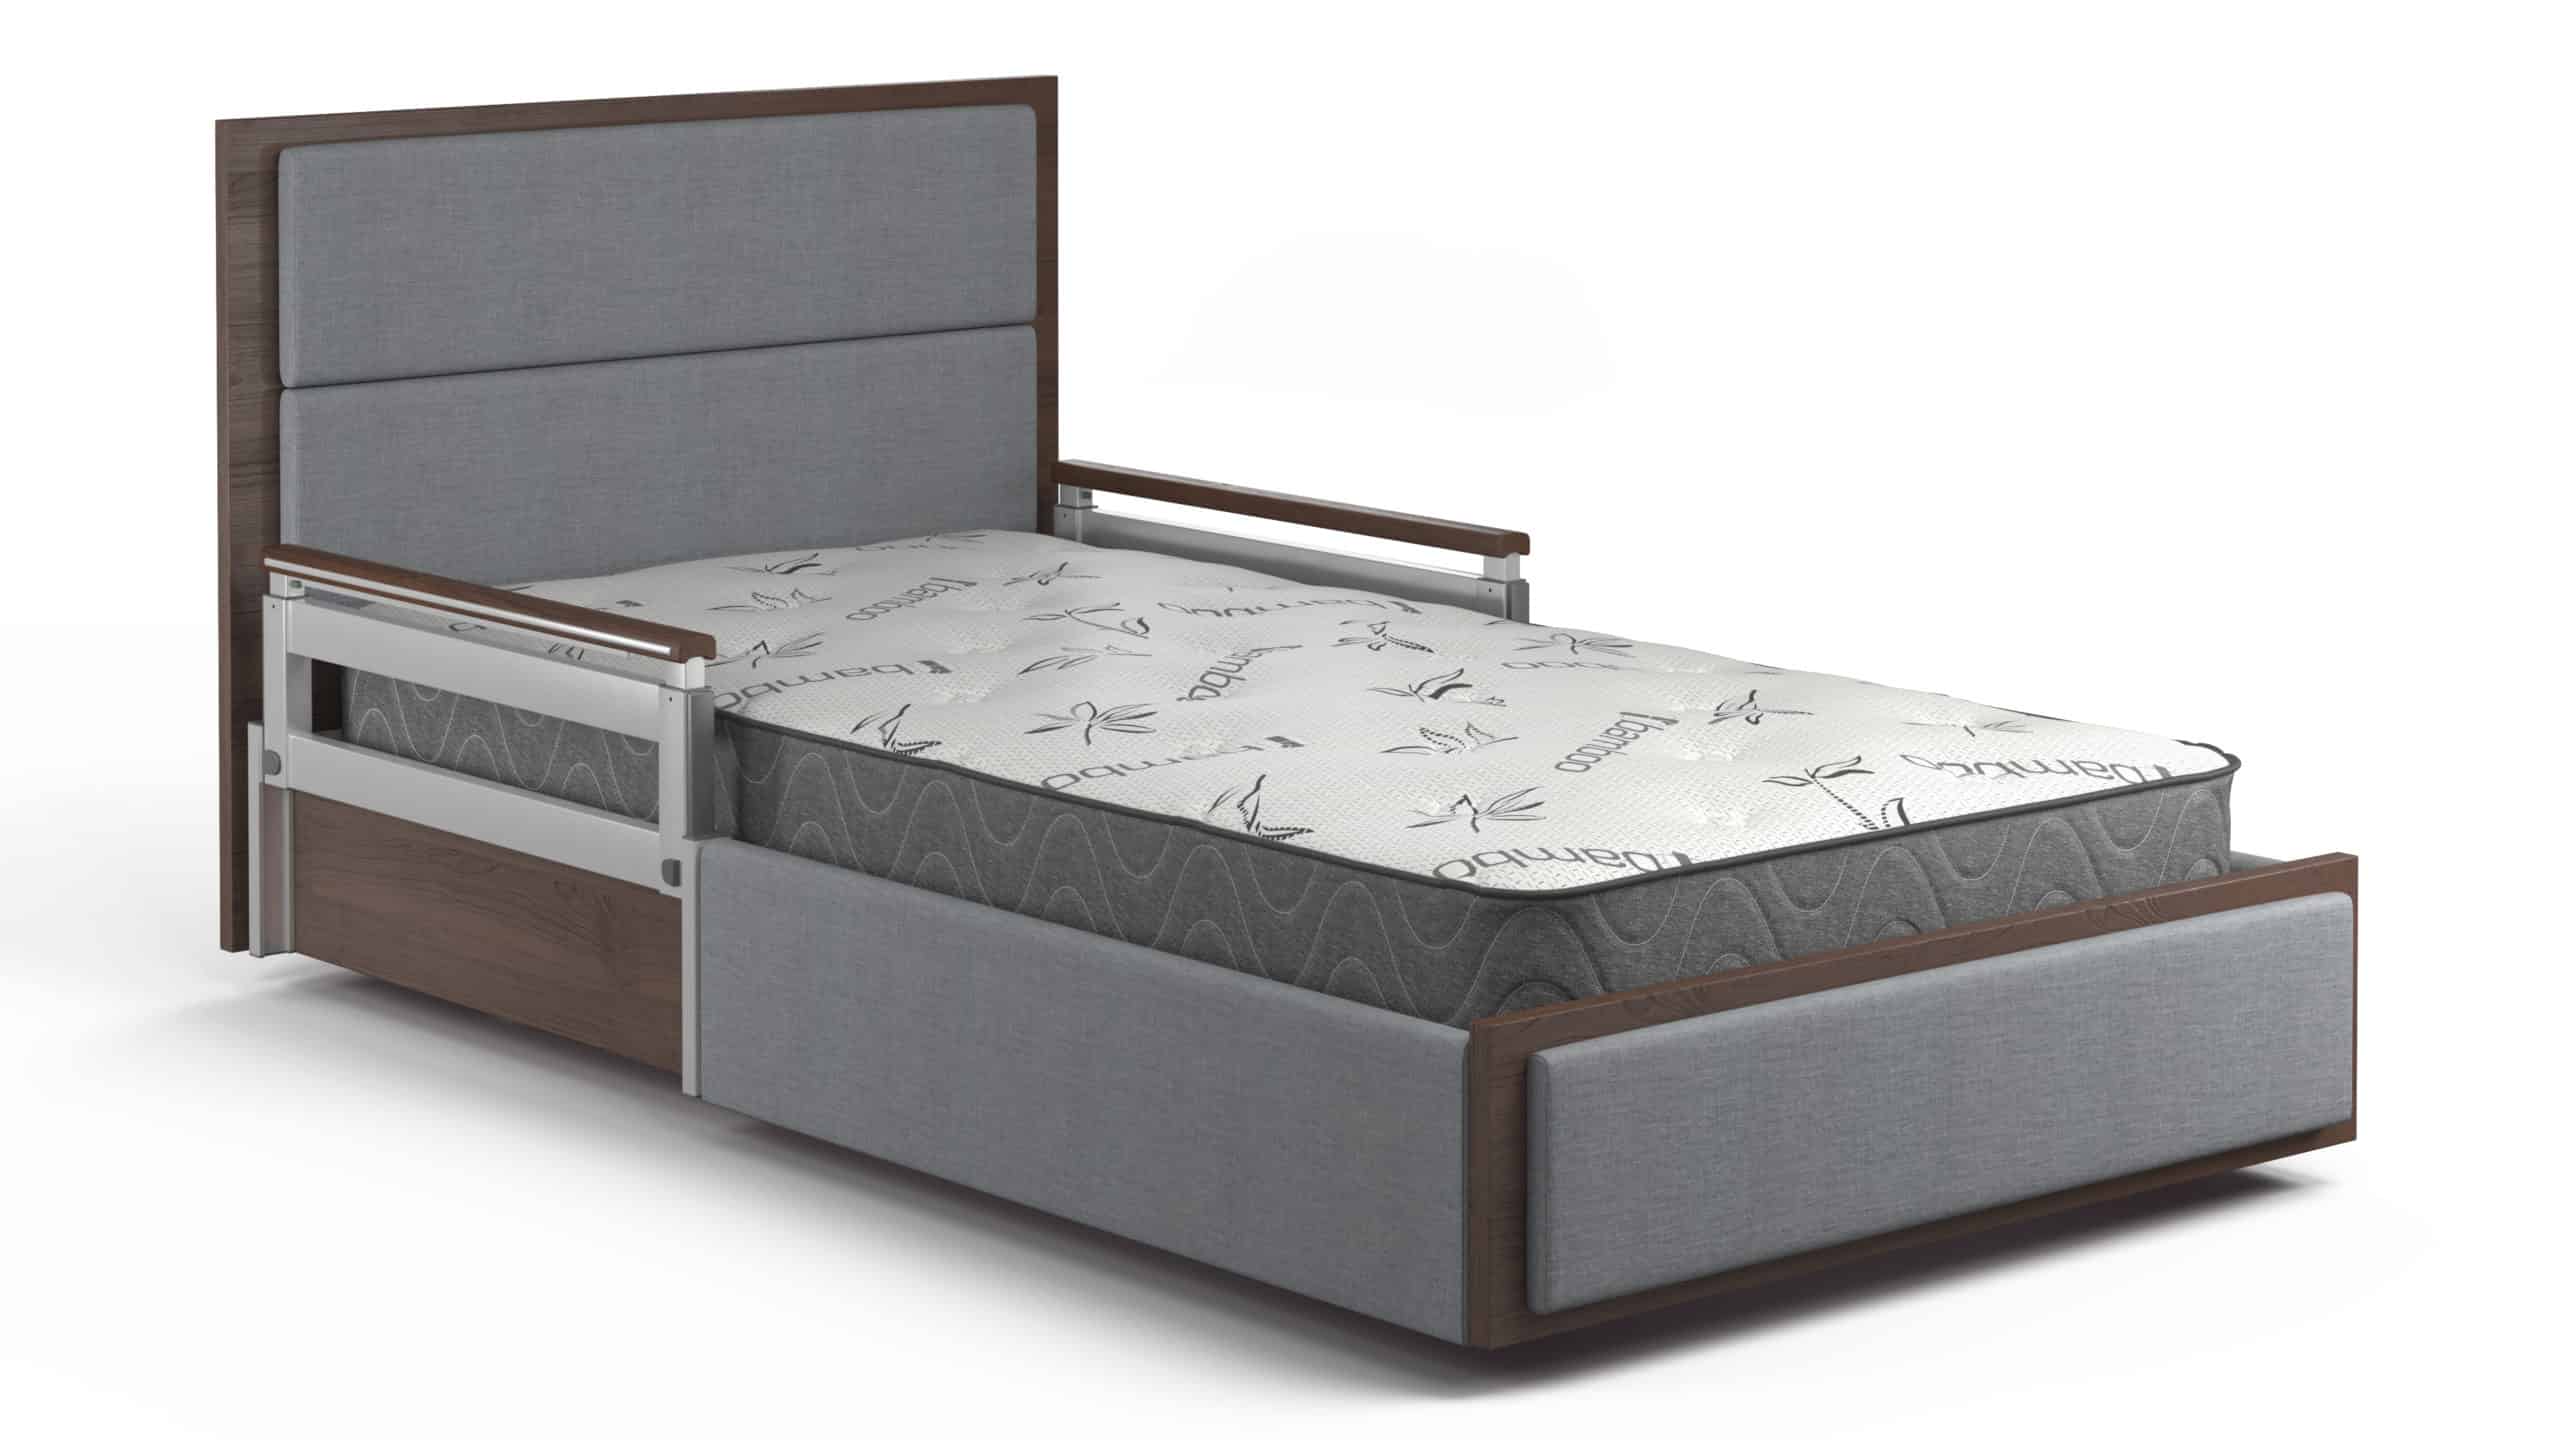 a bed frame with a mattress and headboard.